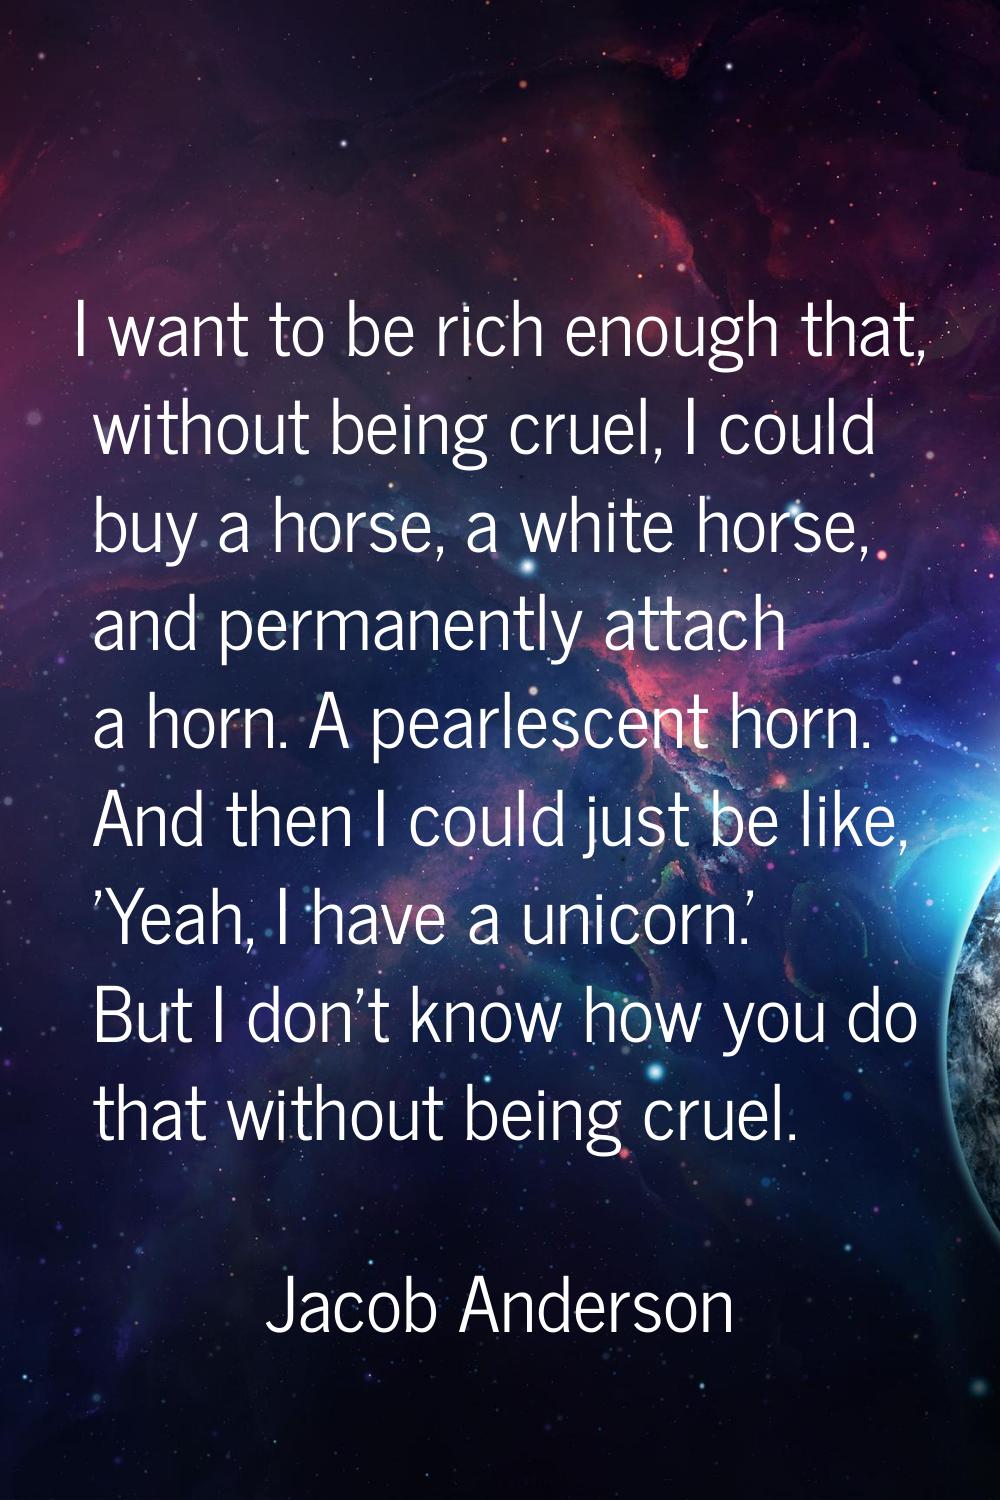 I want to be rich enough that, without being cruel, I could buy a horse, a white horse, and permane